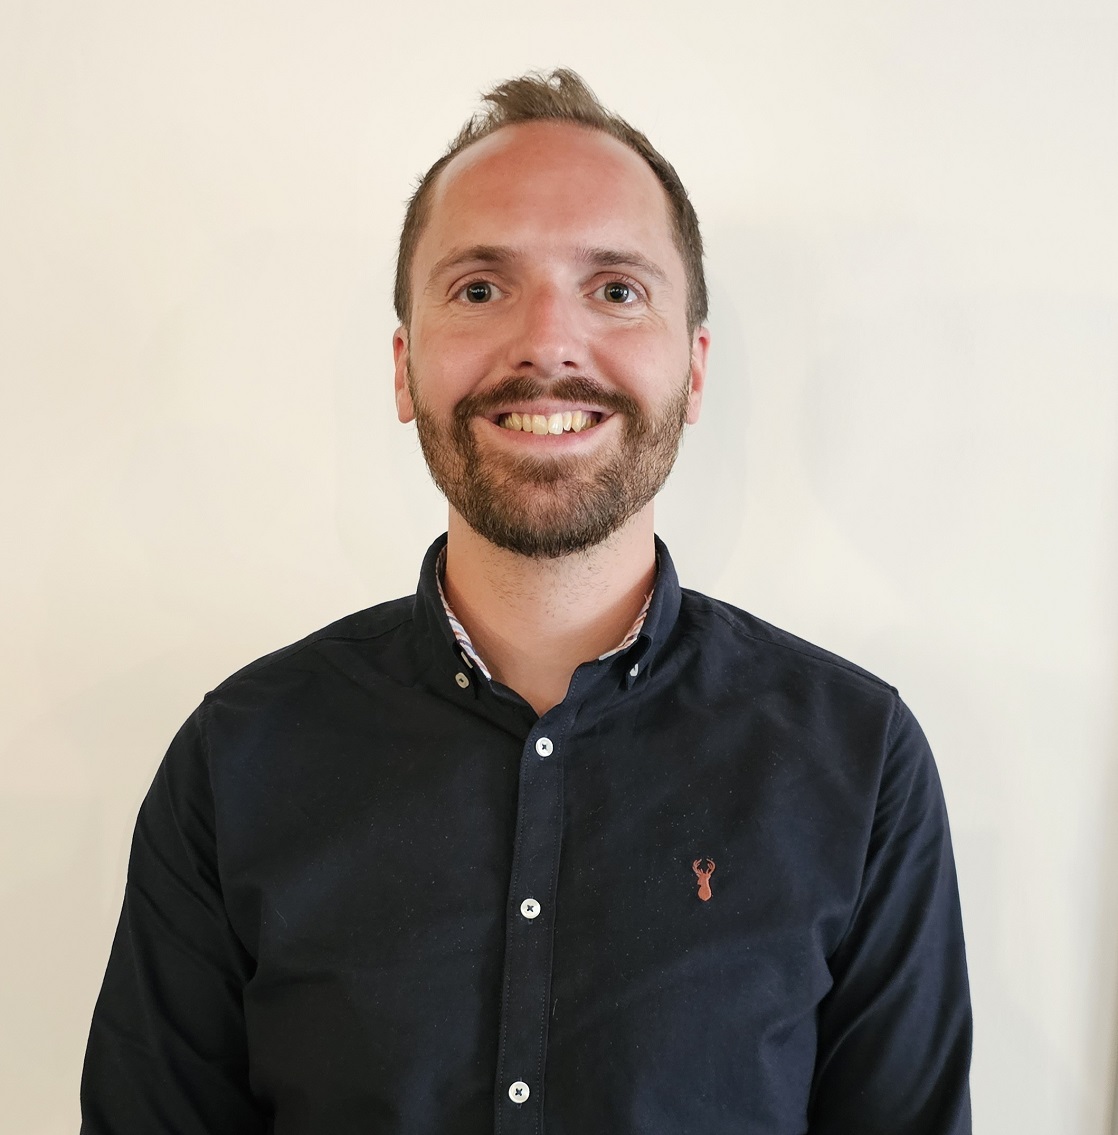 Sam Hinchliffe joins Rocket Group as technical director of architecture